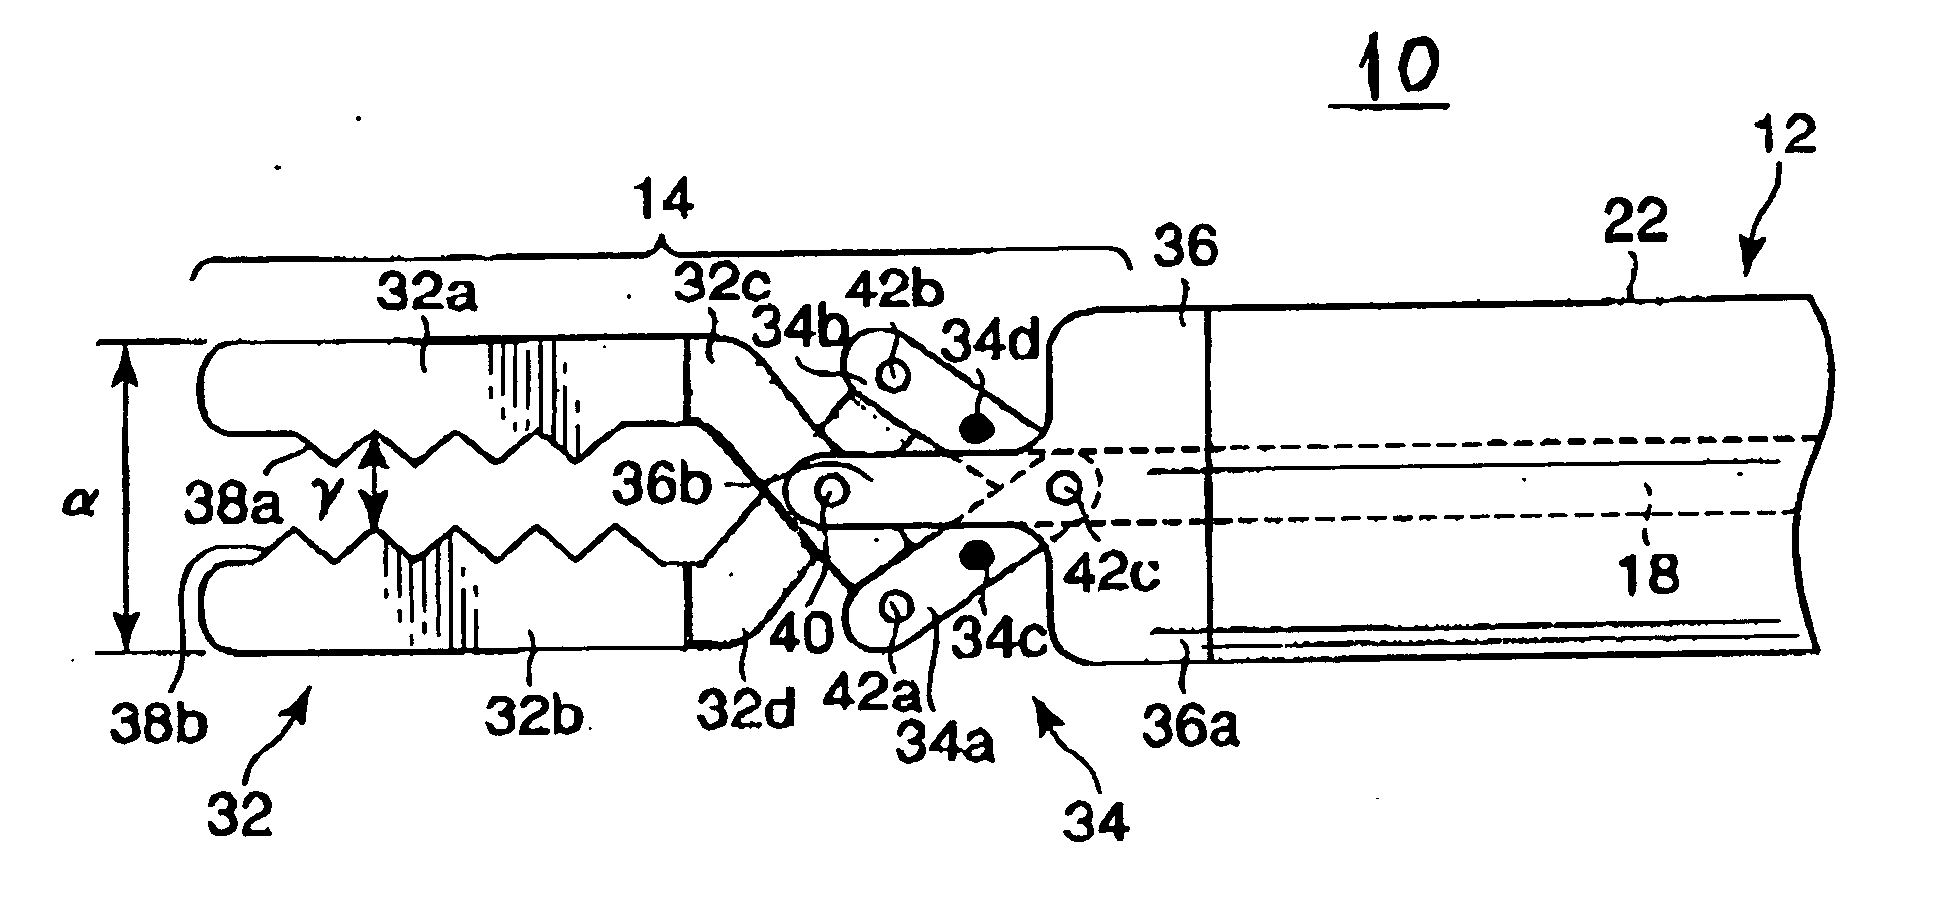 High frequency treatment device having a pair of jaws with electrodes